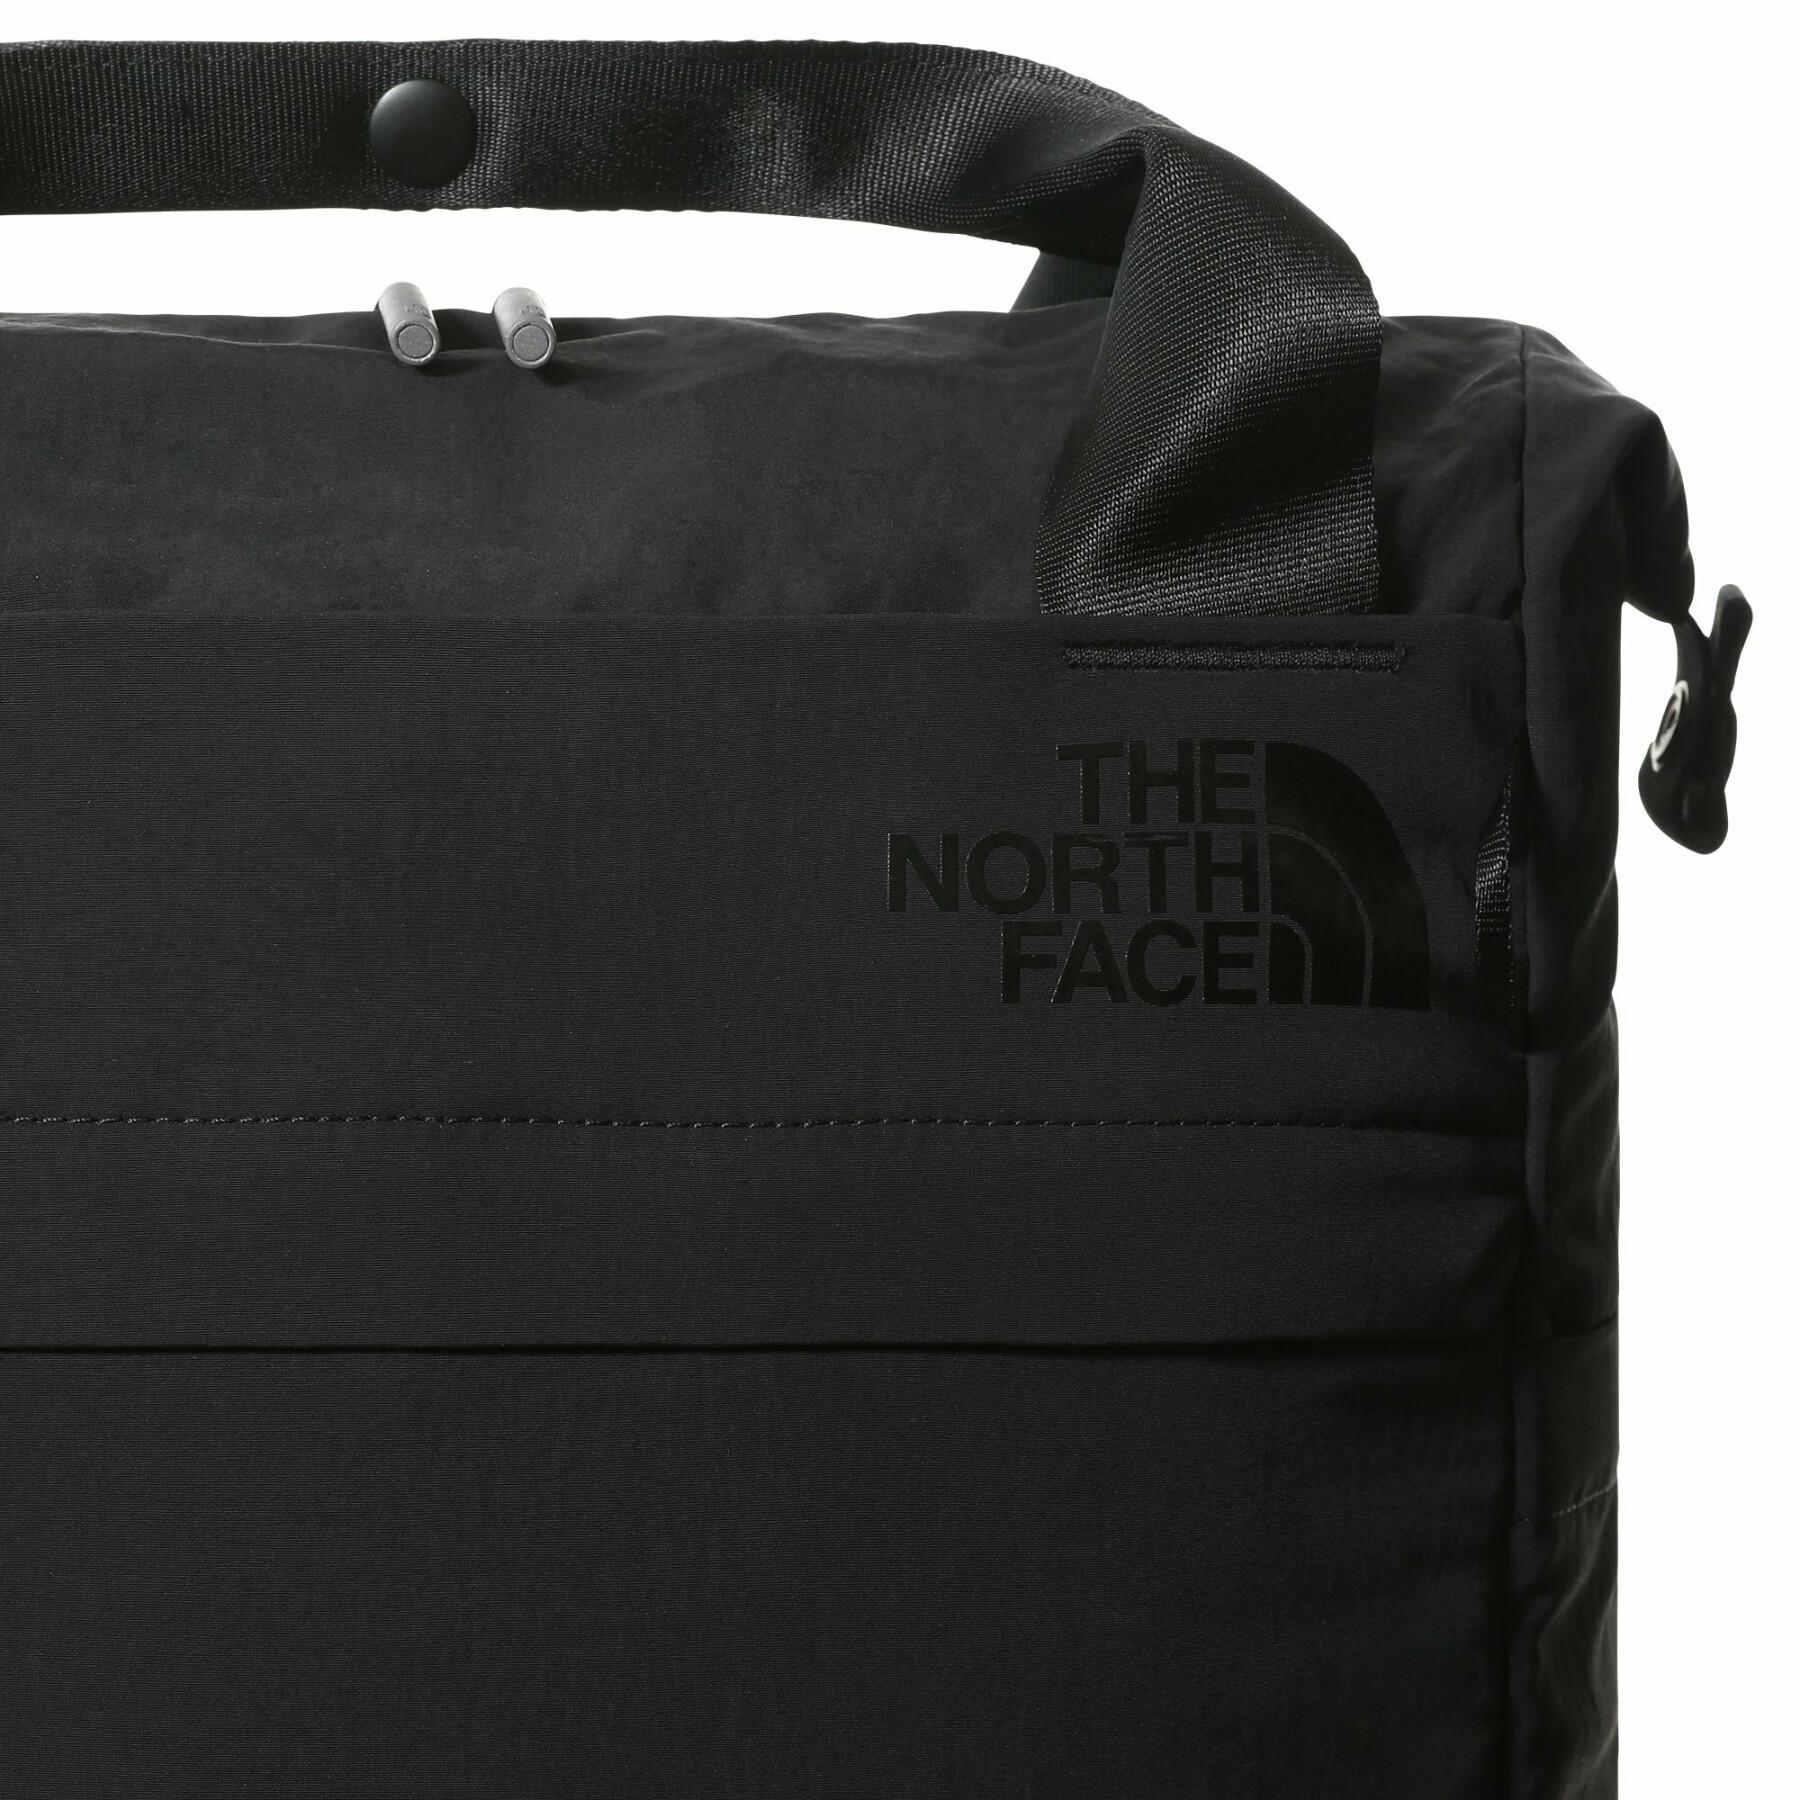 Women's backpack The North Face Never Stop Utility